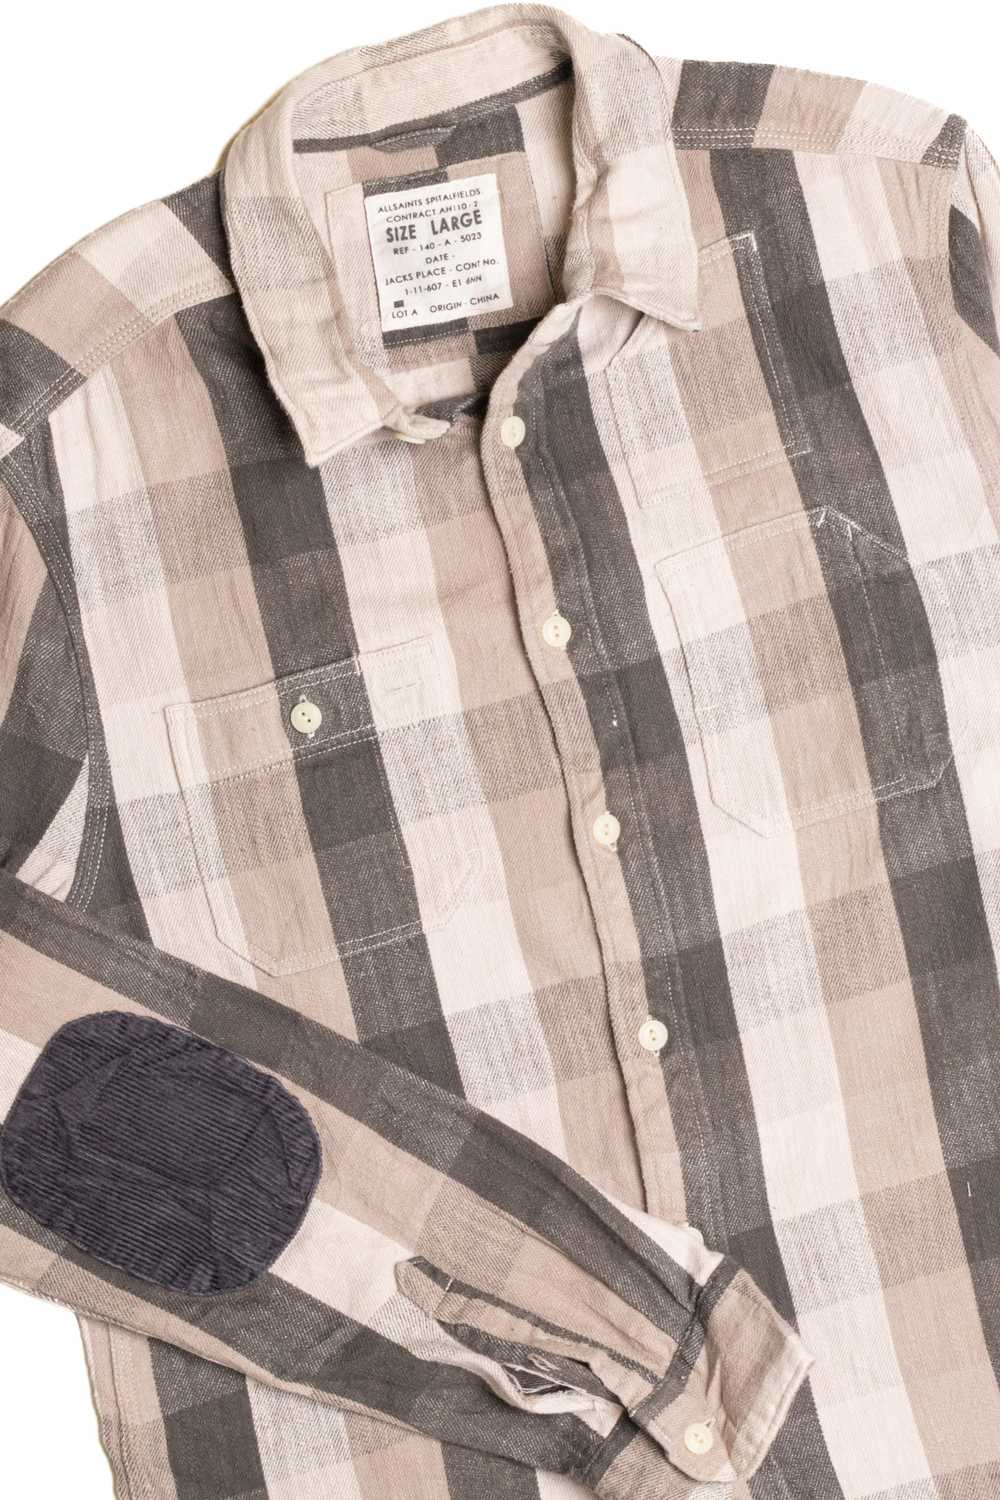 Striped Flannel Shirt 5064 - image 2